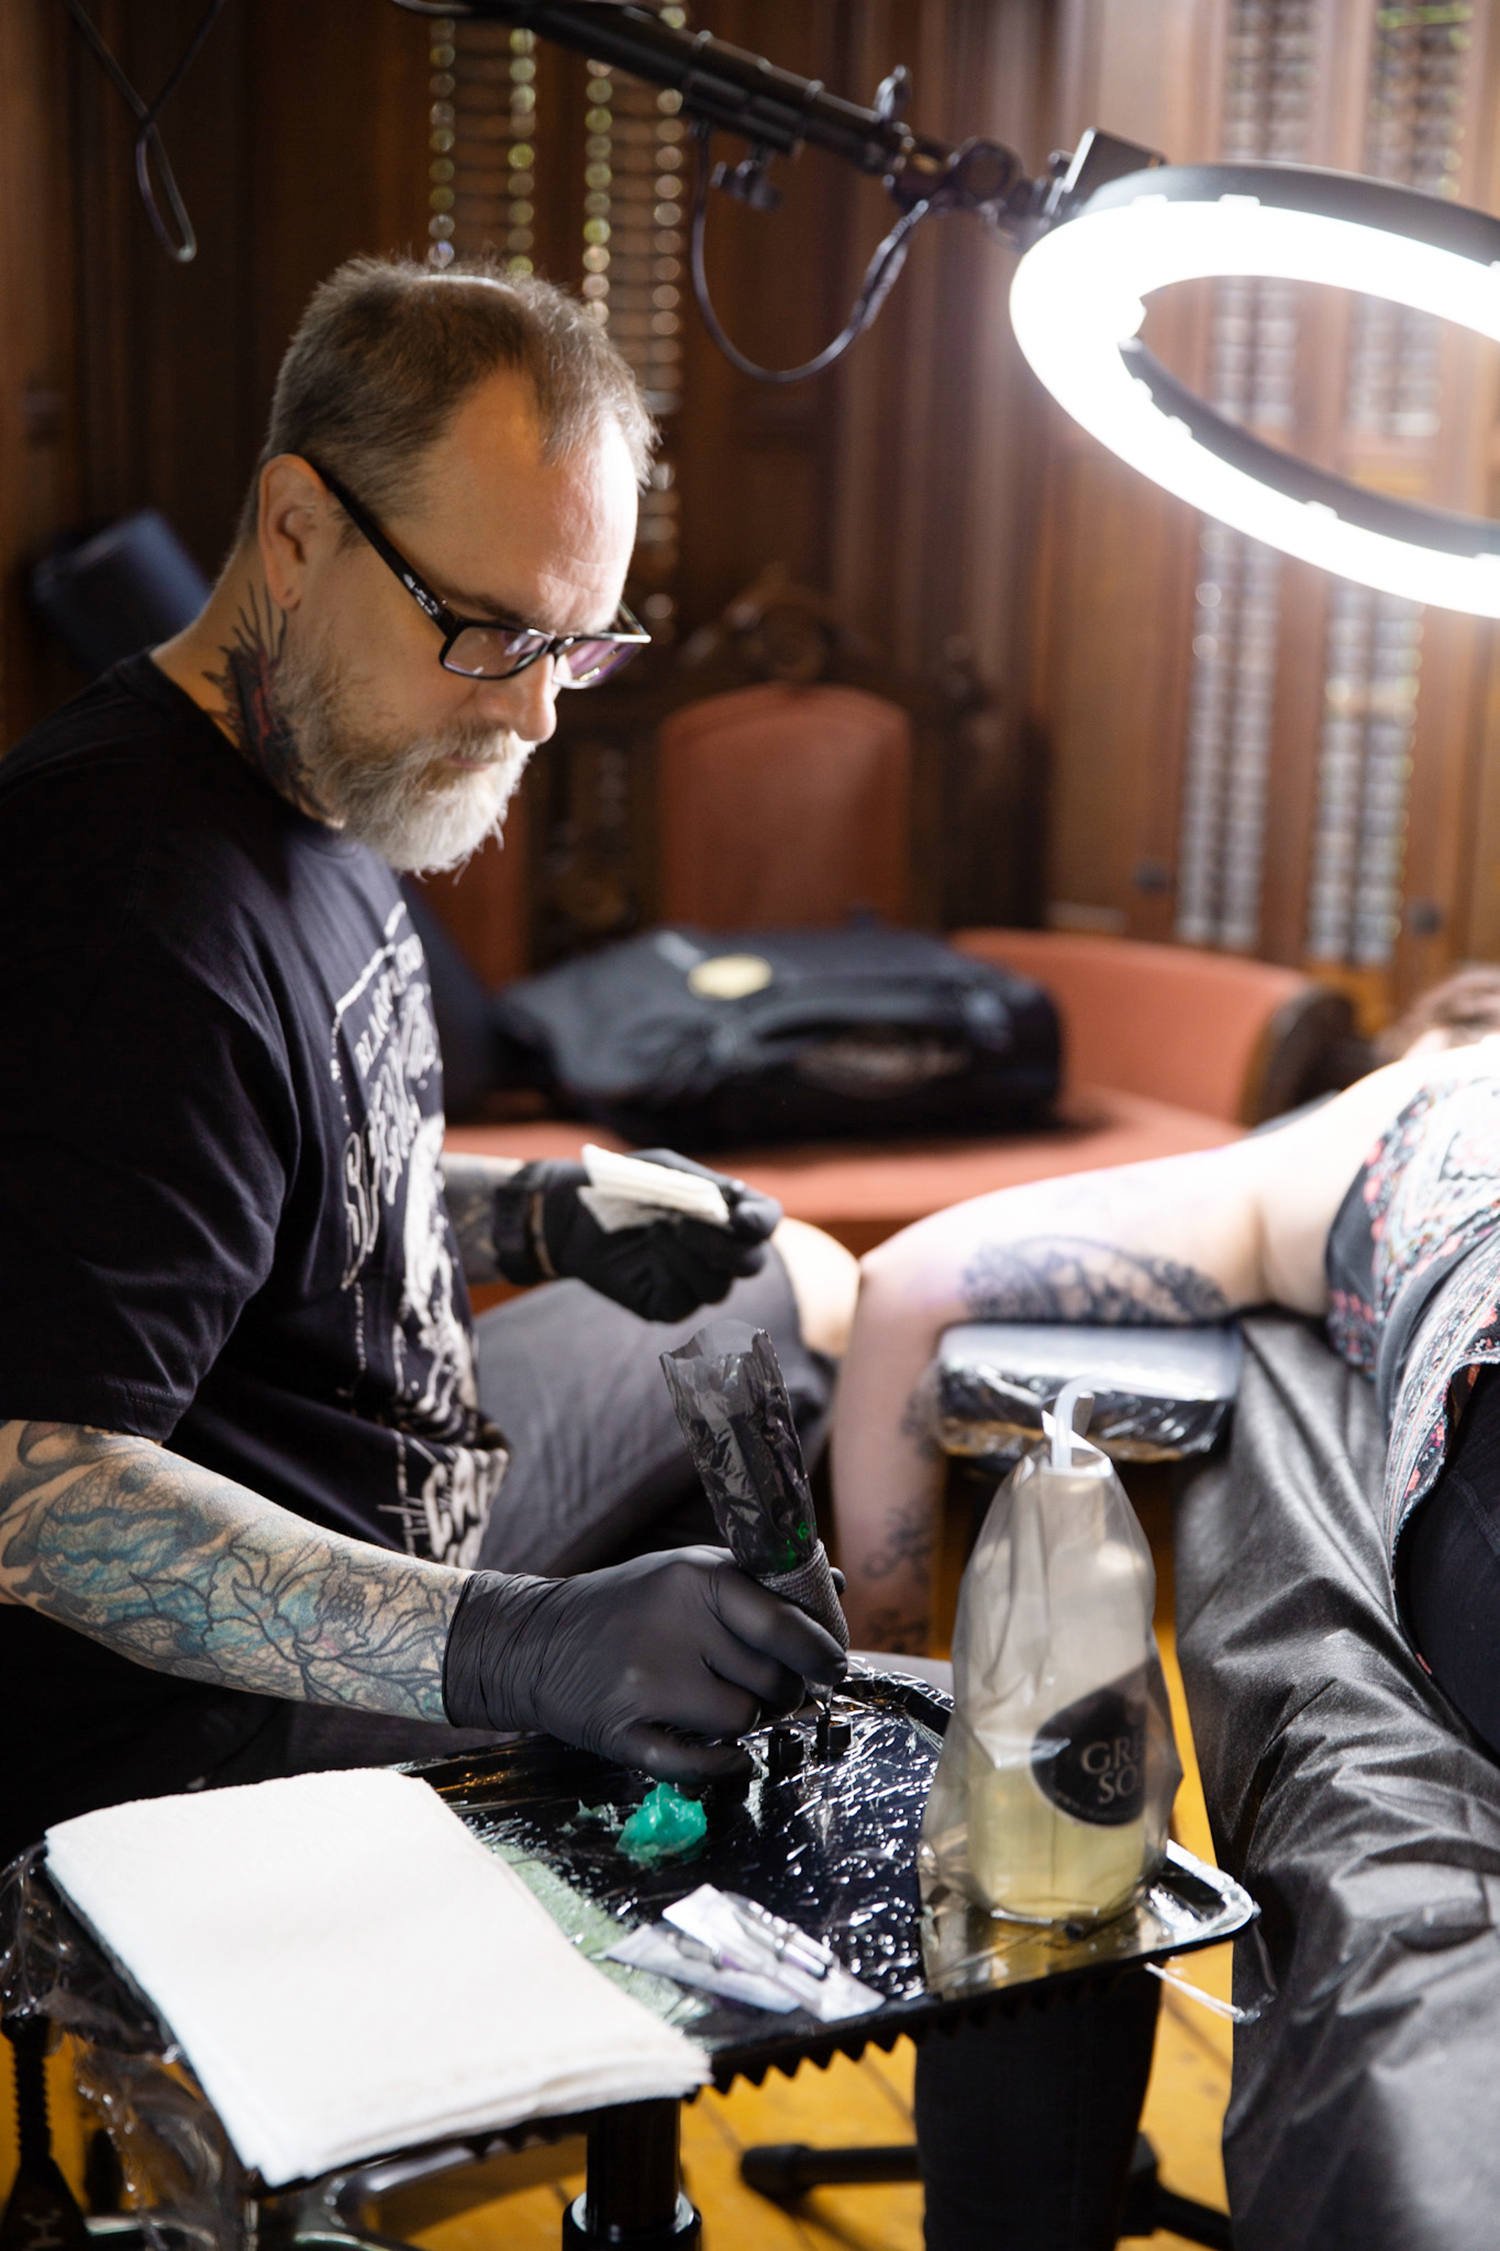 Mark Clifford, proprietor of Dearly Departed Tattoos and Fine art, at work